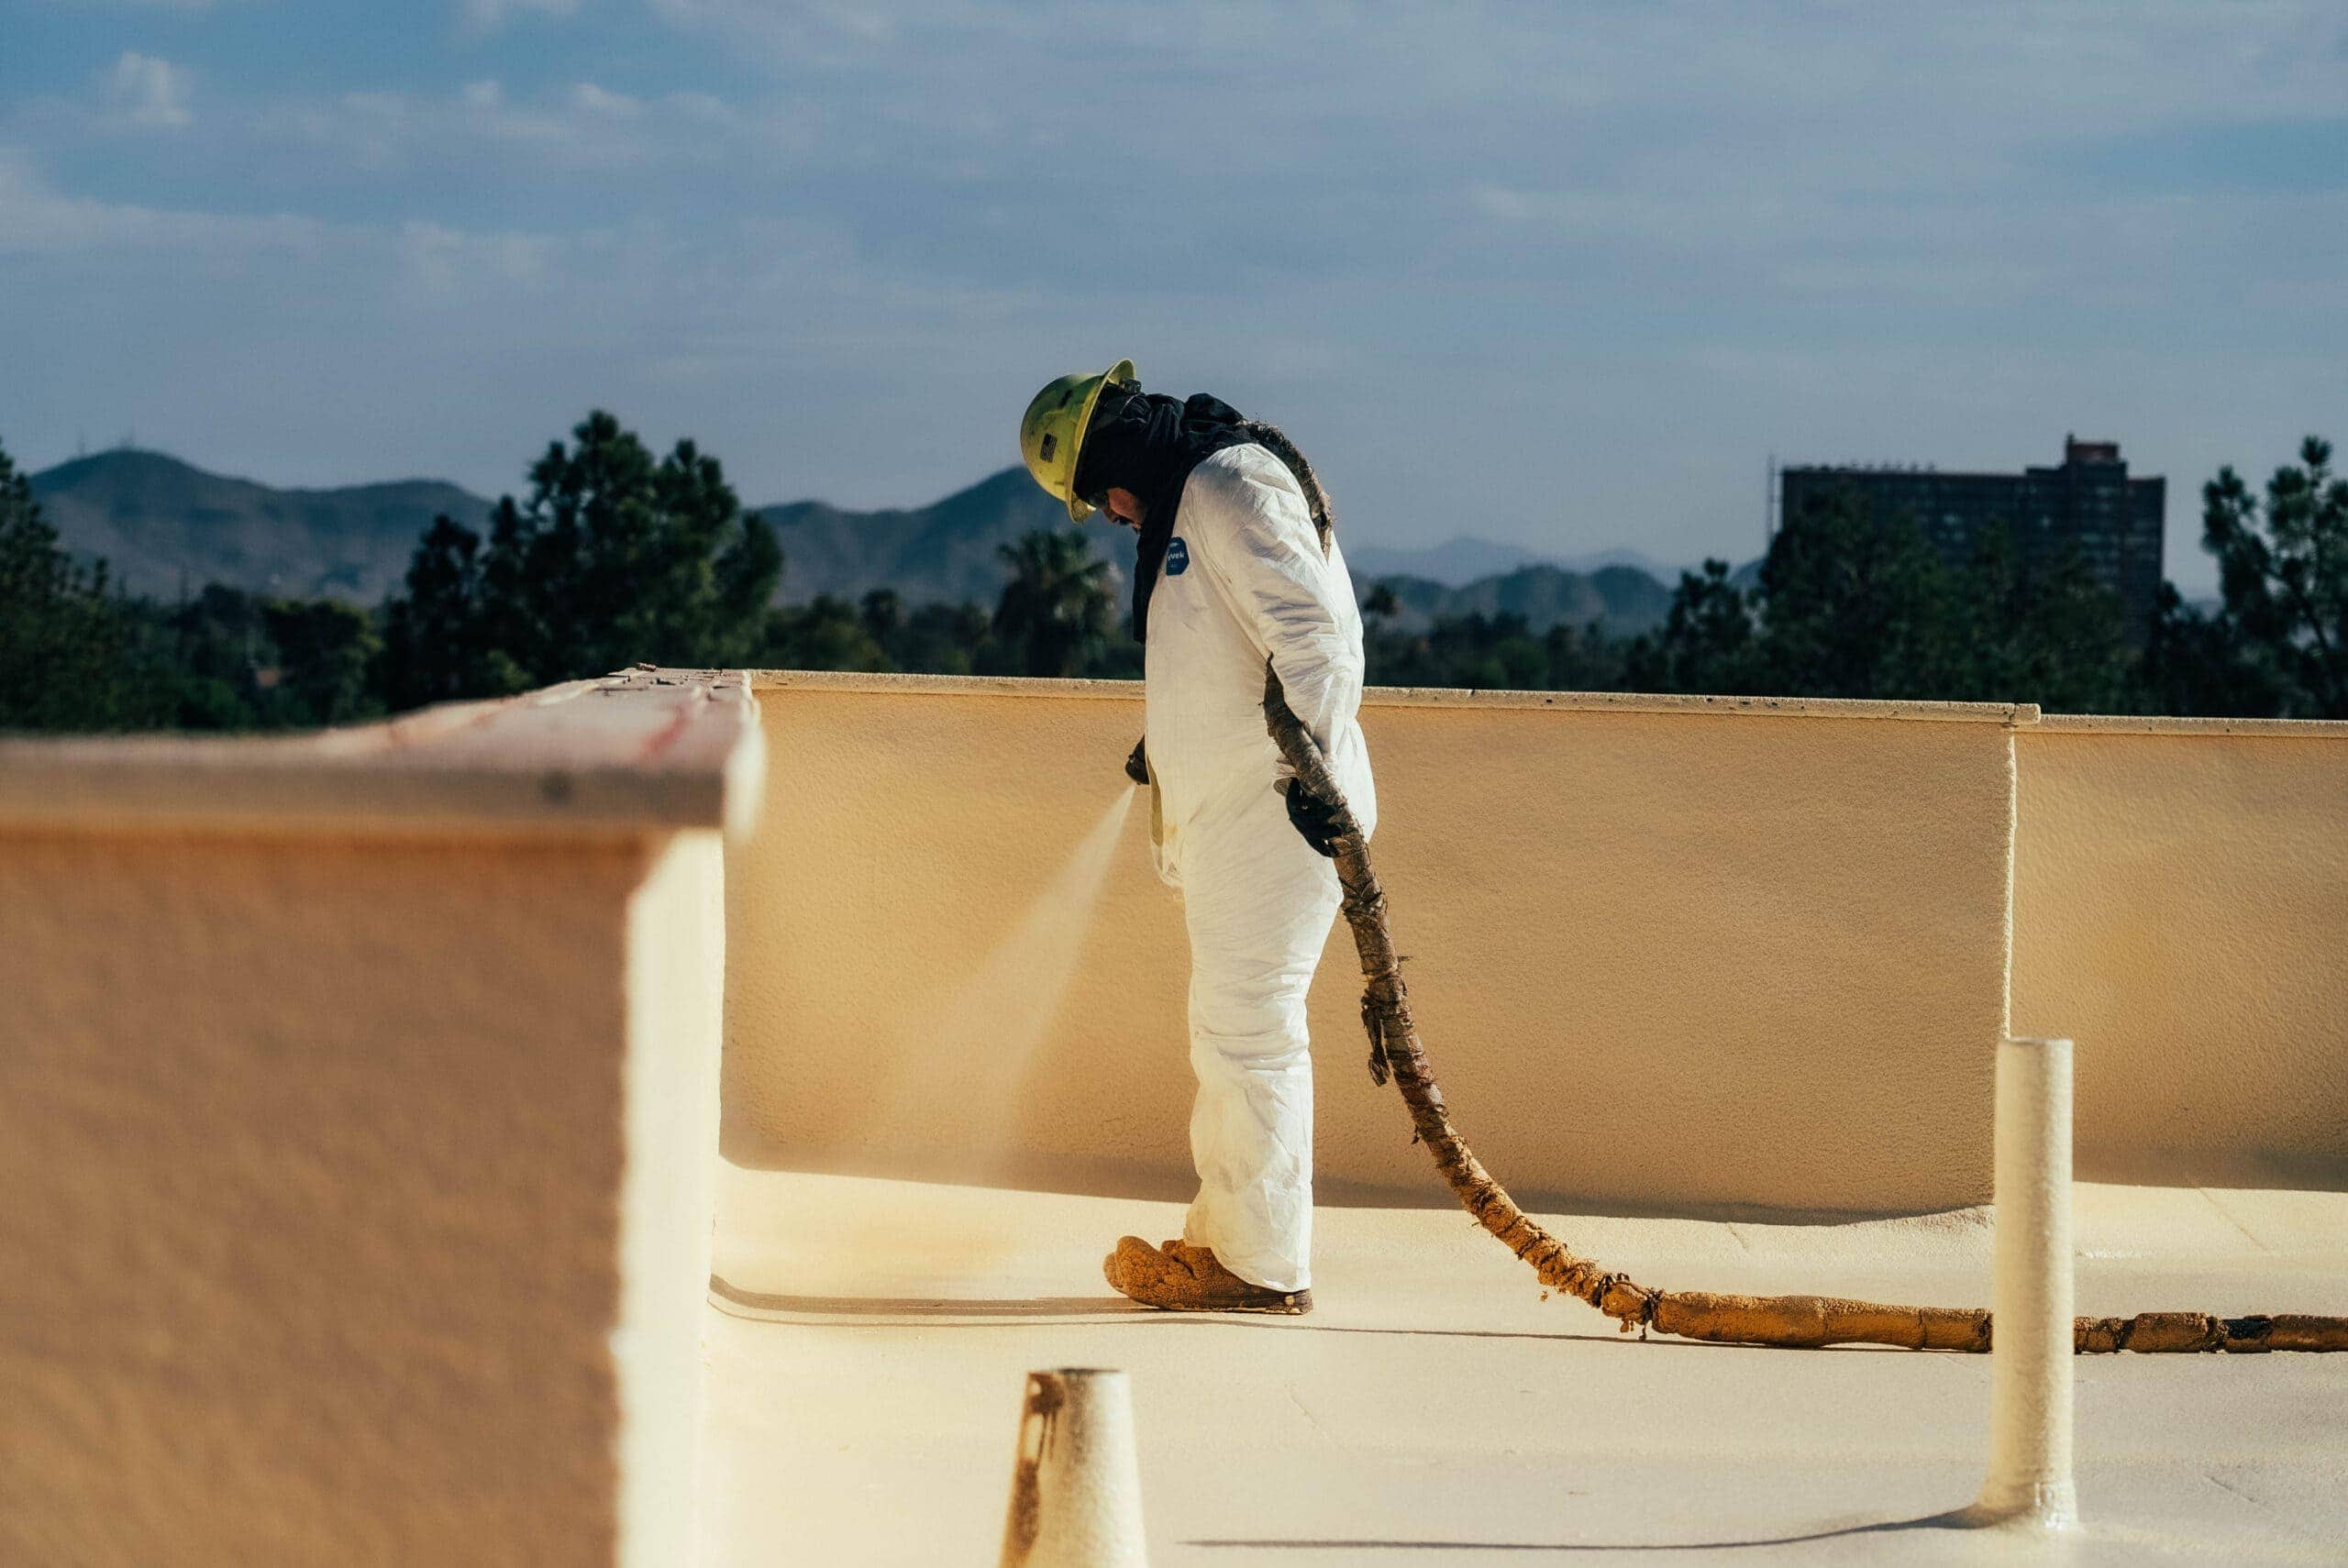 A professional in protective gear applies coating over spray foam on a rooftop in the serene Whisper Rock area.